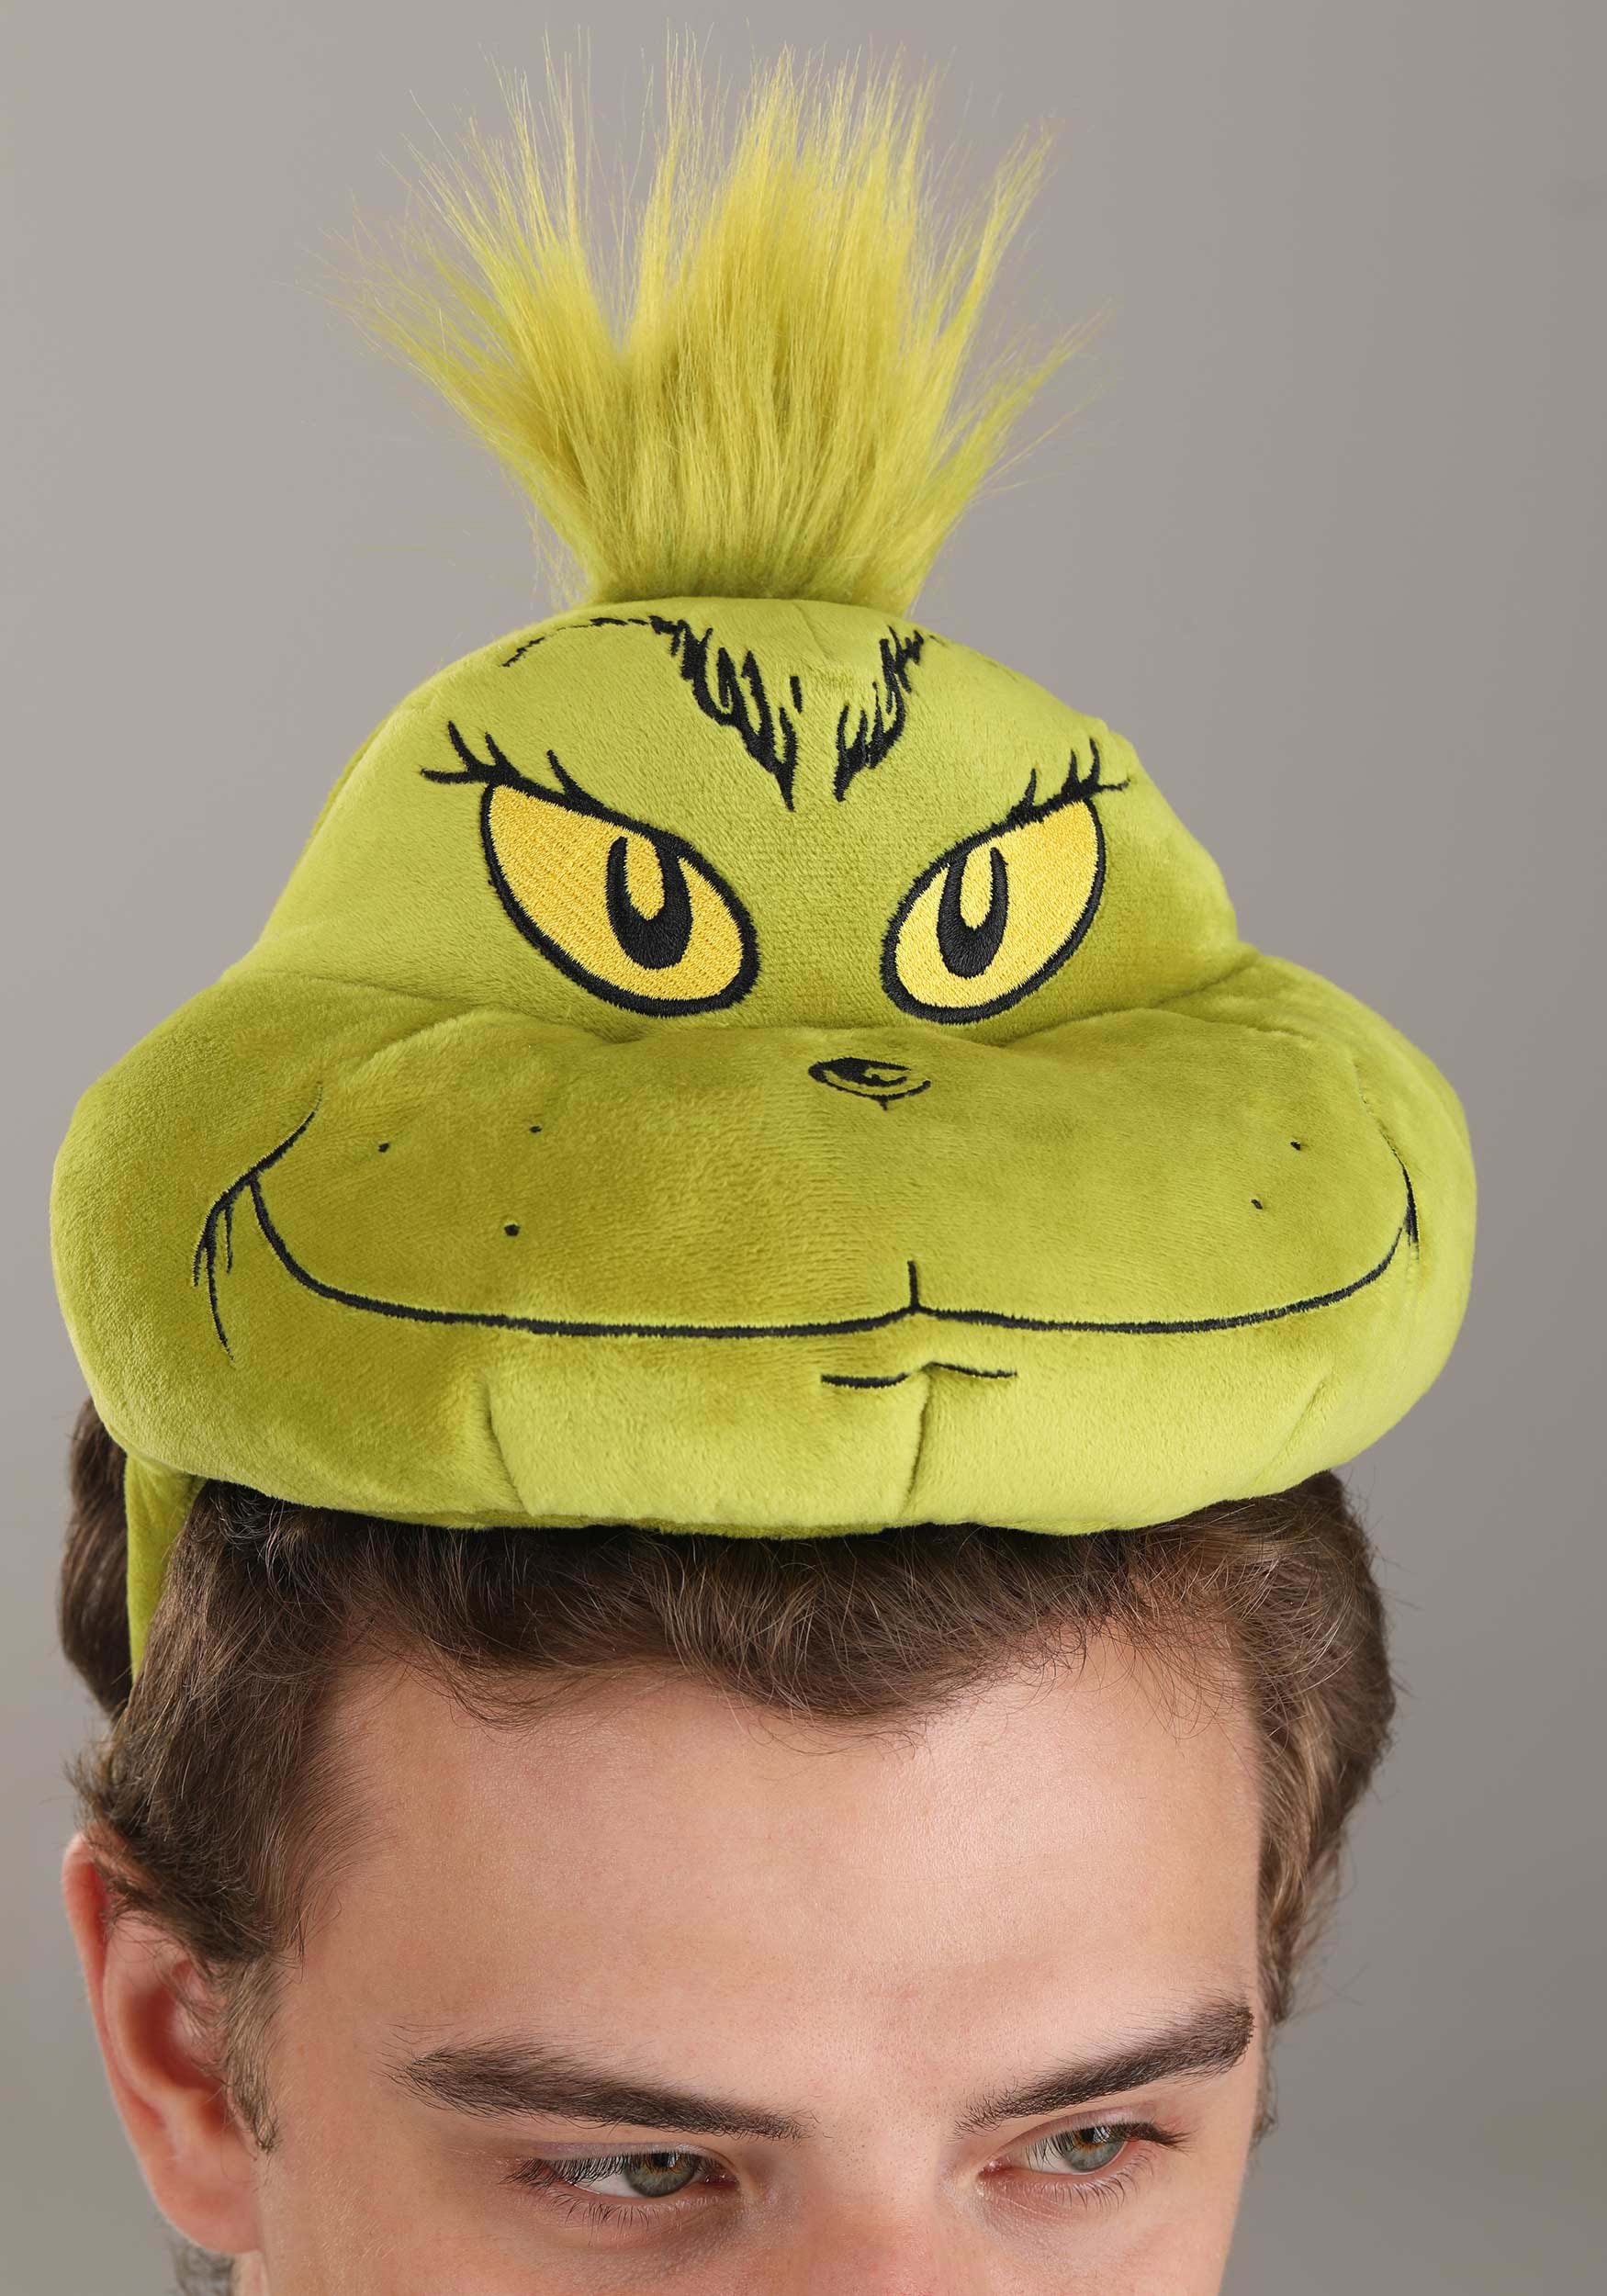 The Grinch Apparel & Accessories